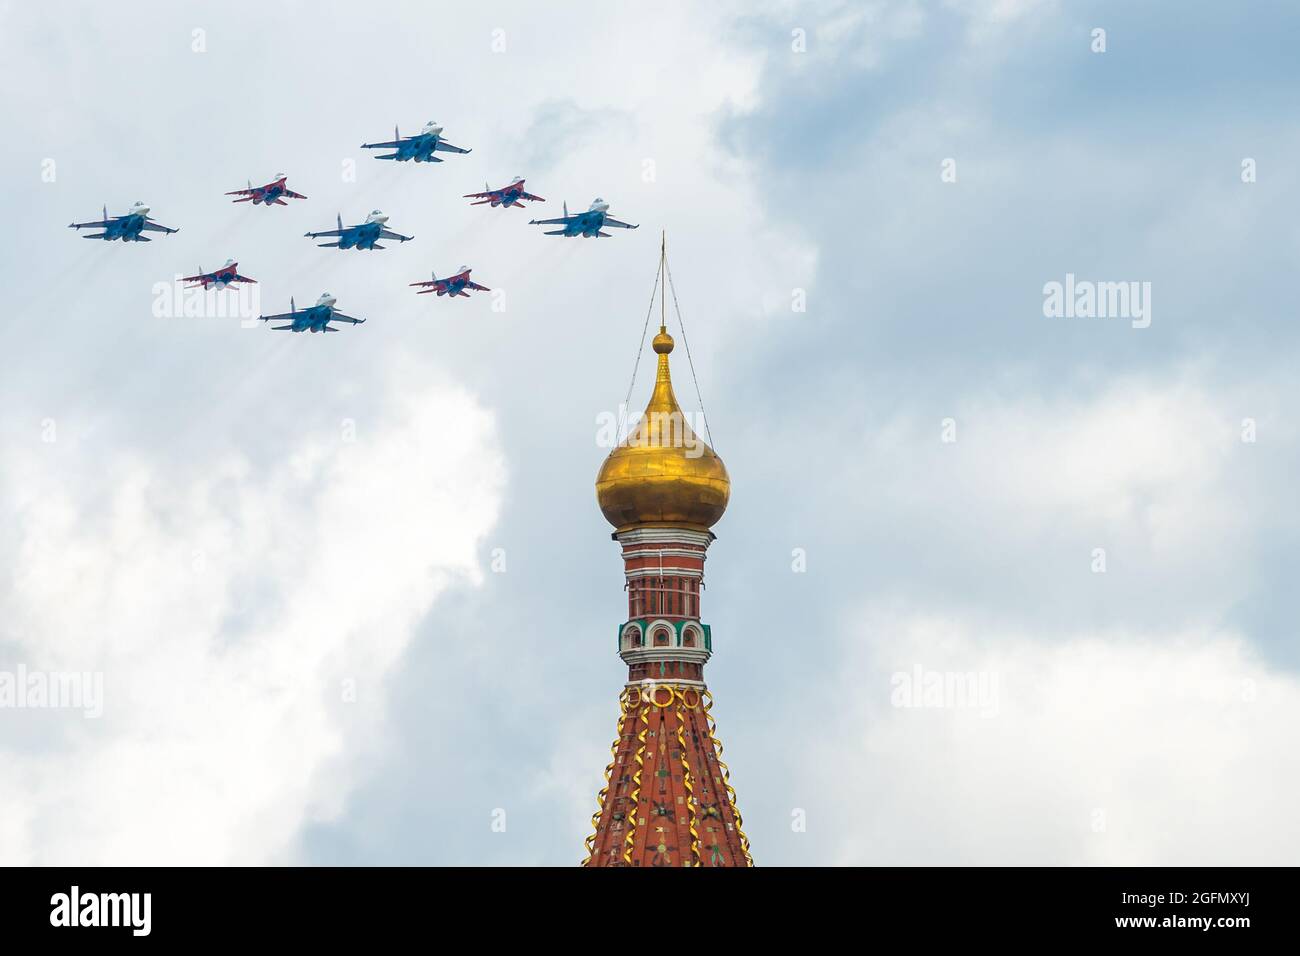 May 7, 2021, Moscow, Russia. The Cuban Diamond formation consists of MiG-29 and Su-30SM fighters of the Russian Knights and Strizhi aerobatic teams ov Stock Photo